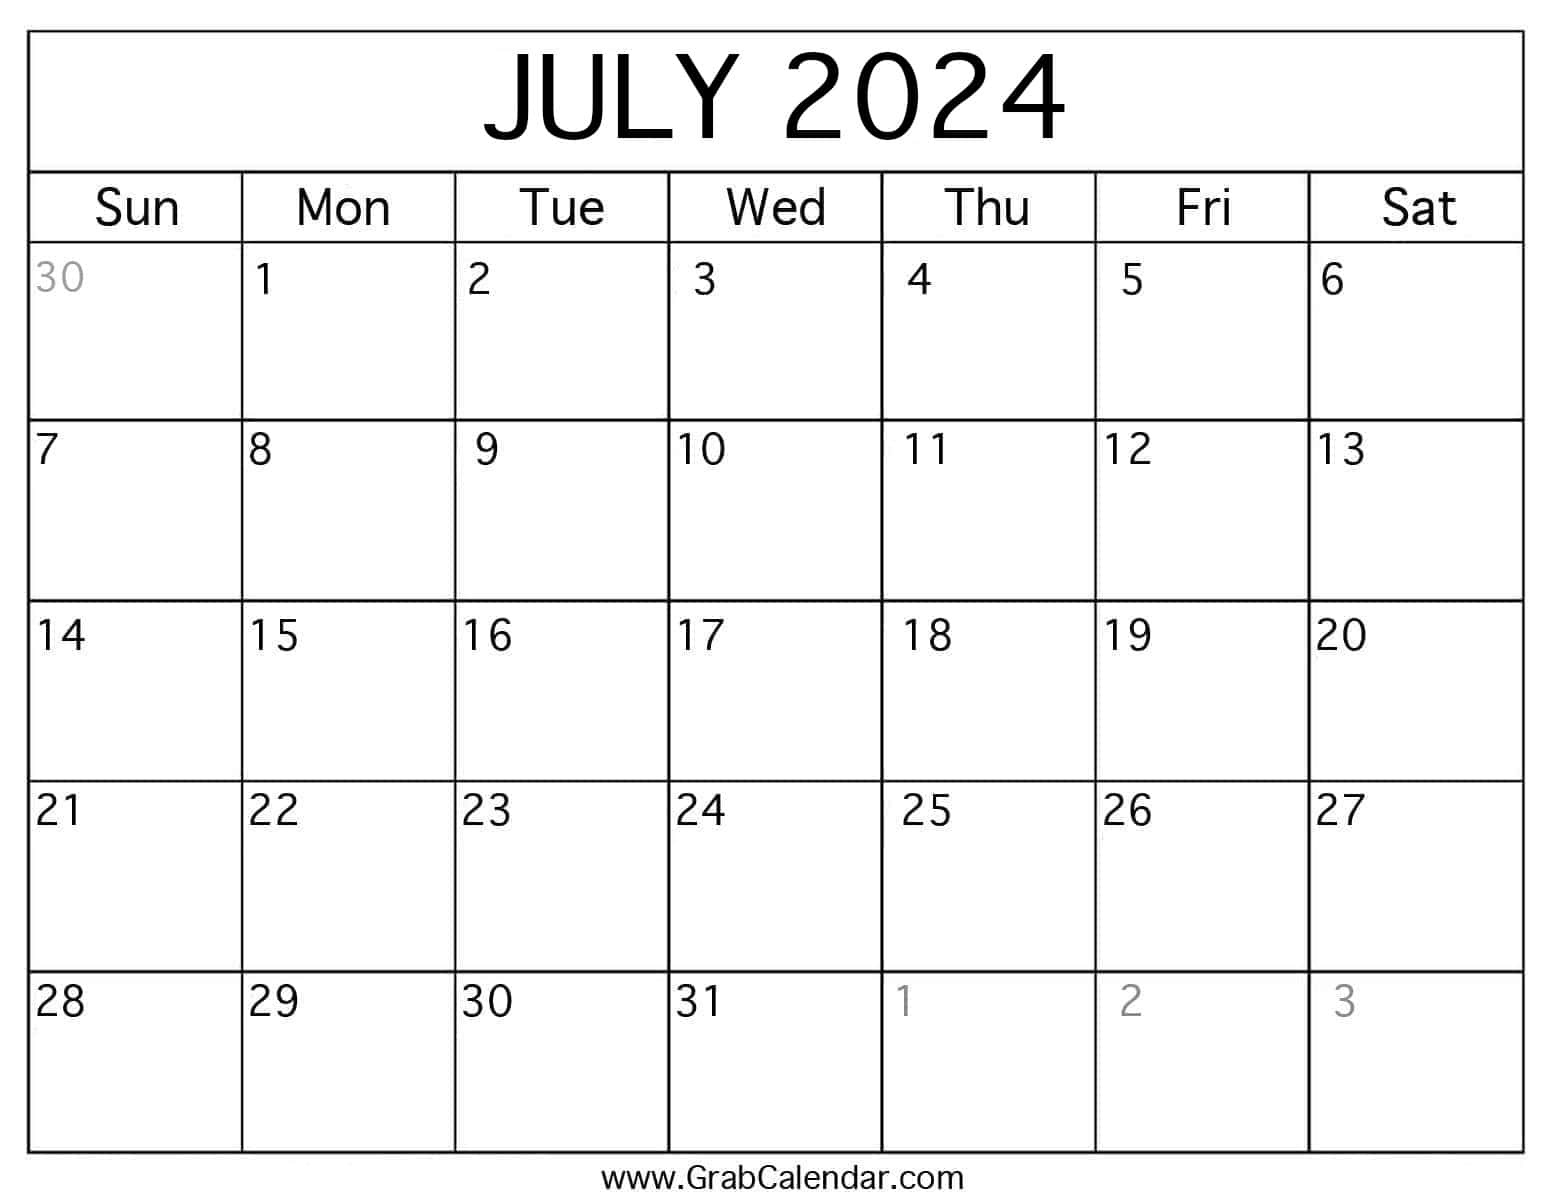 Printable July 2024 Calendar in The Month of July Calendar 2024